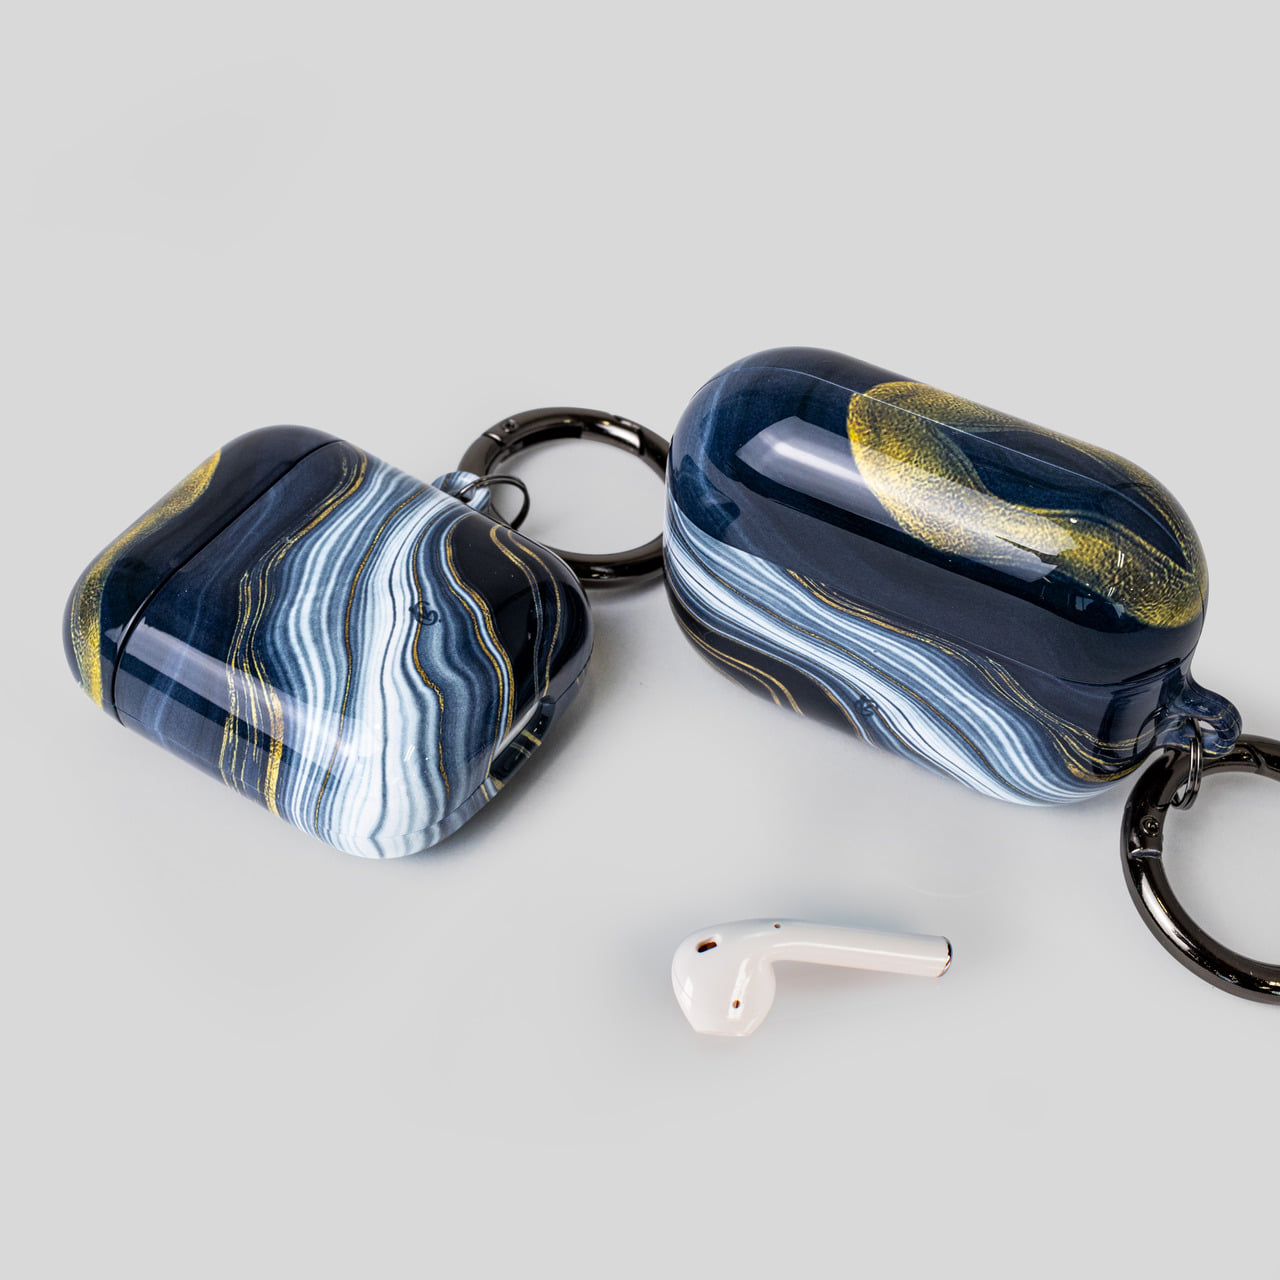 [Airpods cases] Accidental No.13